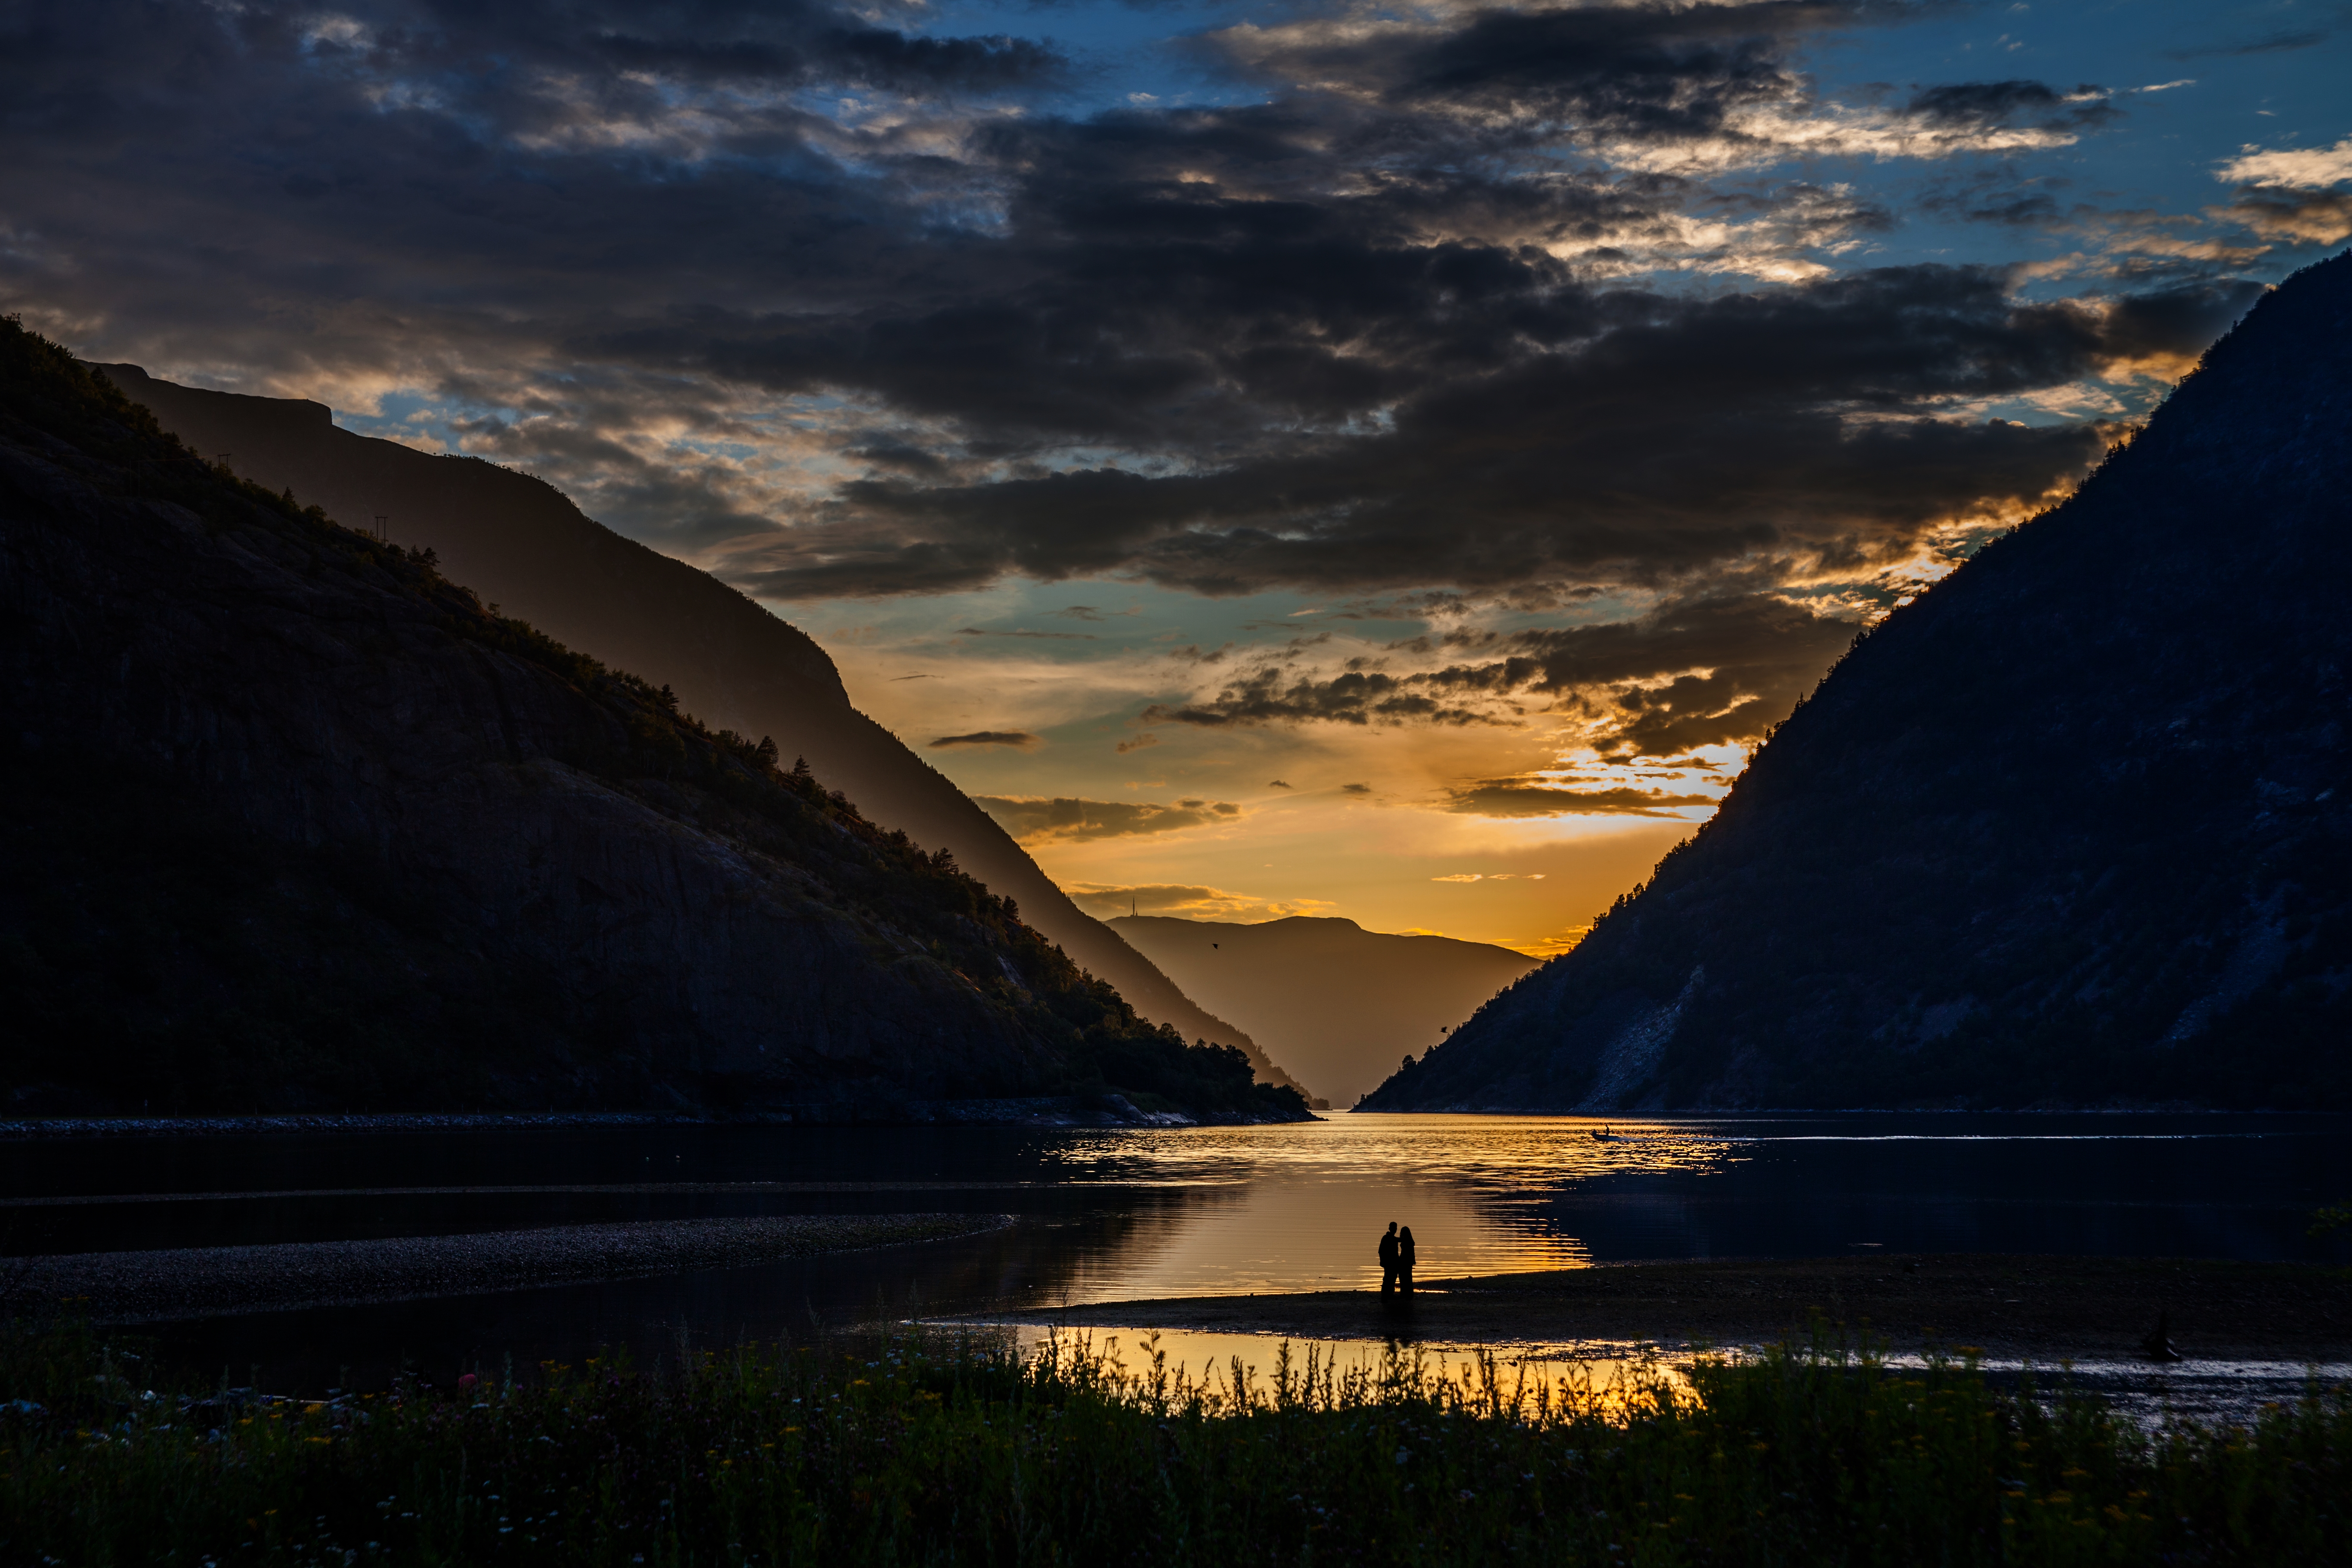 norway, dark, pair, sunset, mountains, clouds, lake, couple, silhouettes High Definition image